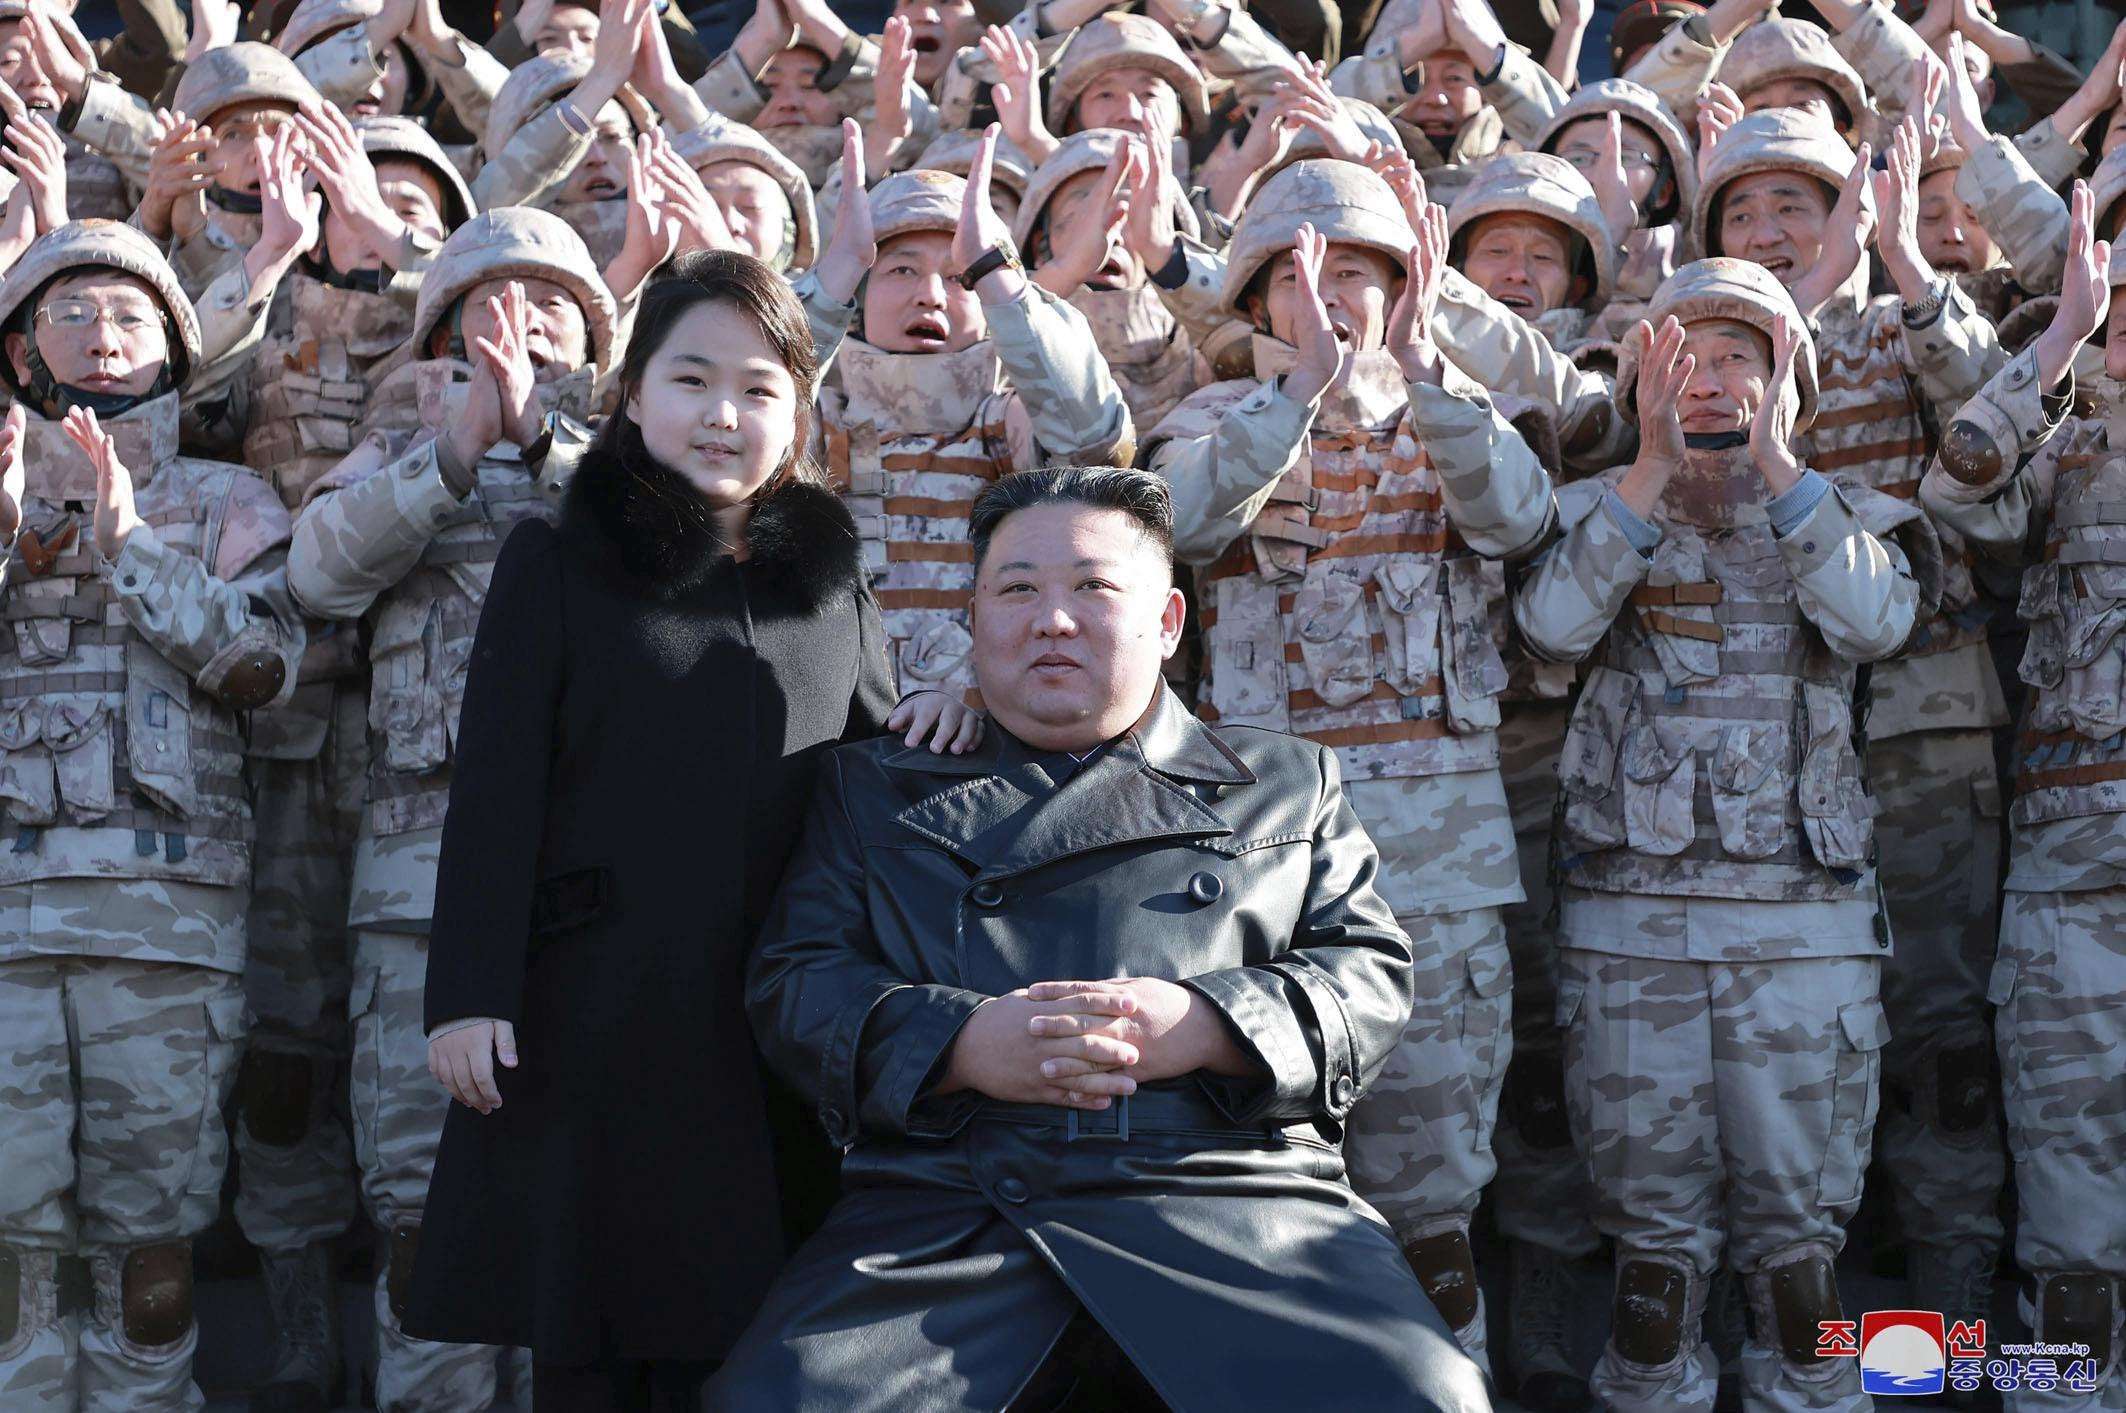 image for Kim’s daughter appears again, heating up succession debate